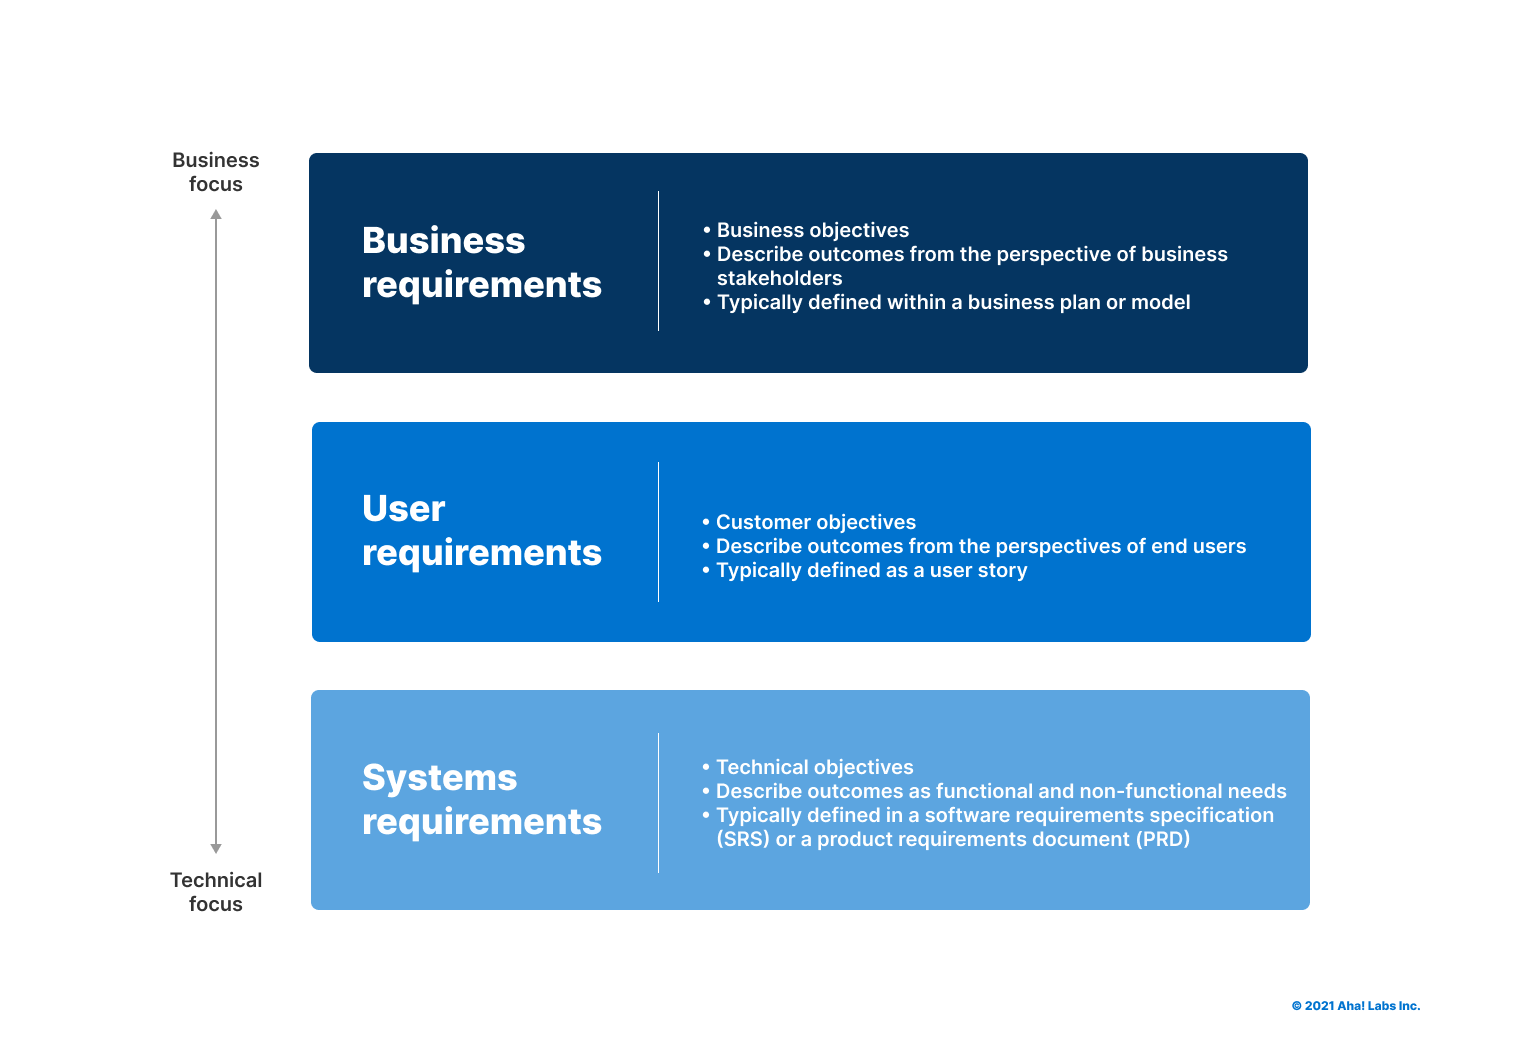 Business, user, and systems requirements